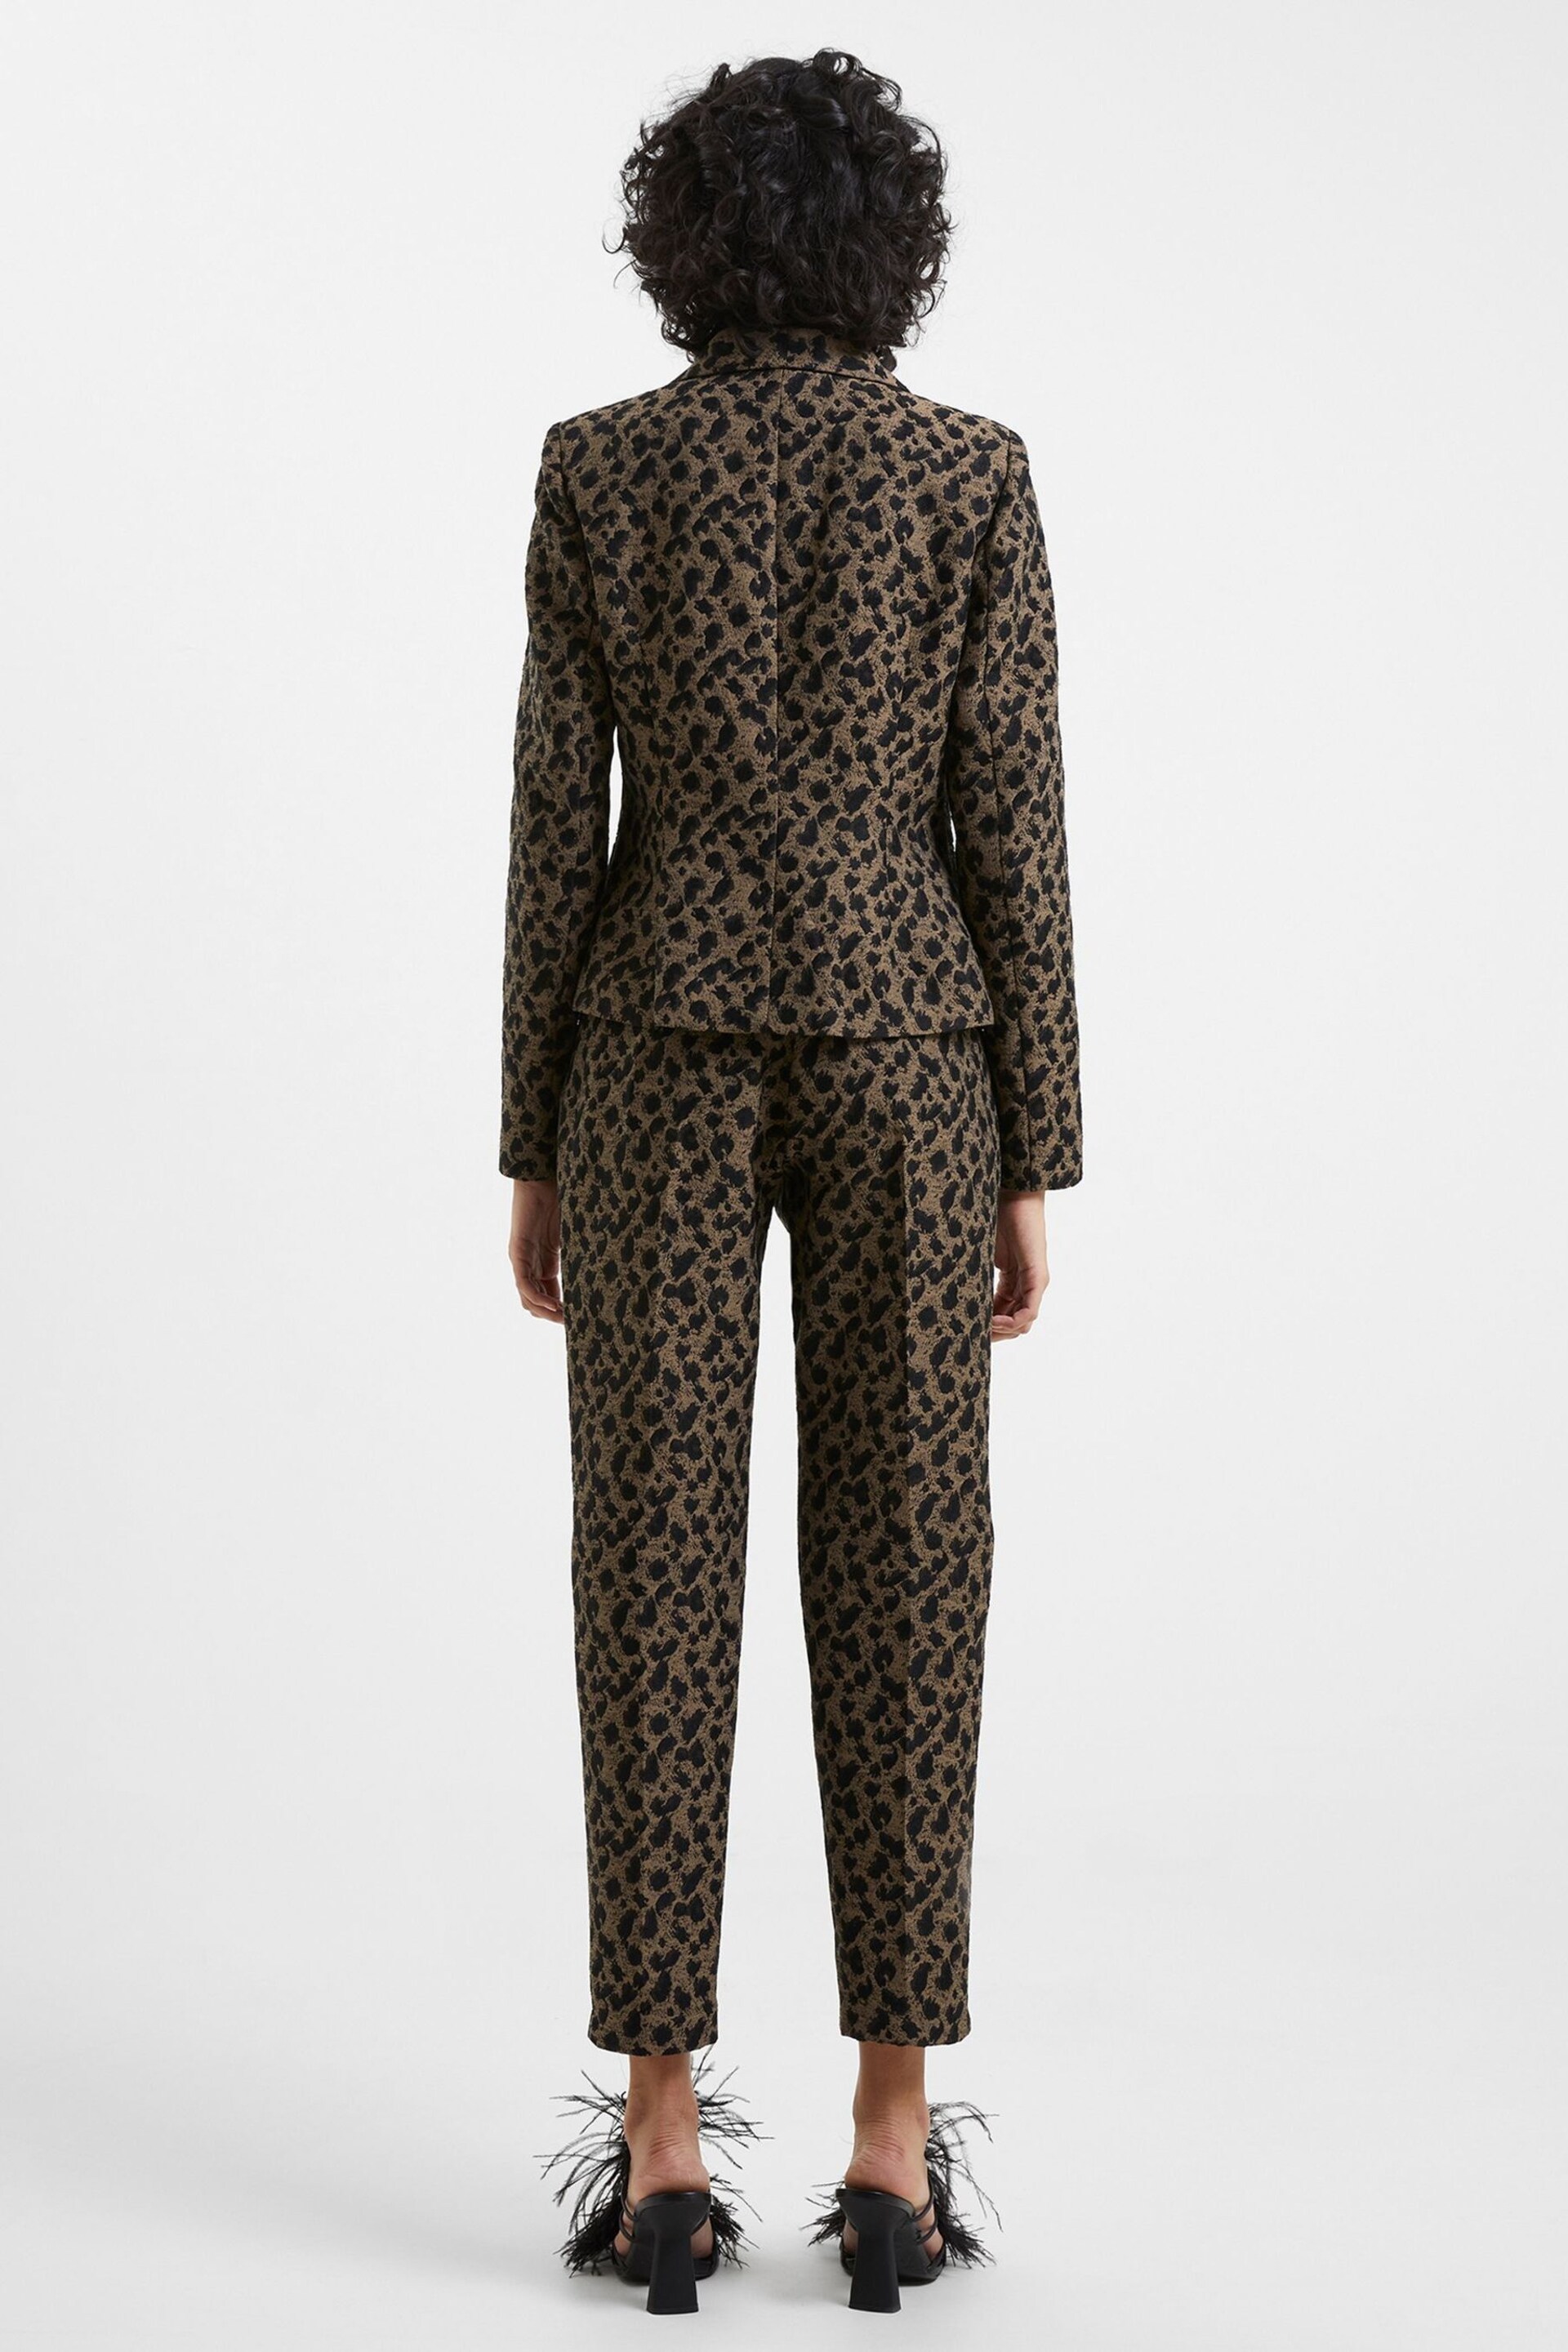 French Connection Estella Jacquard Trousers - Image 2 of 4